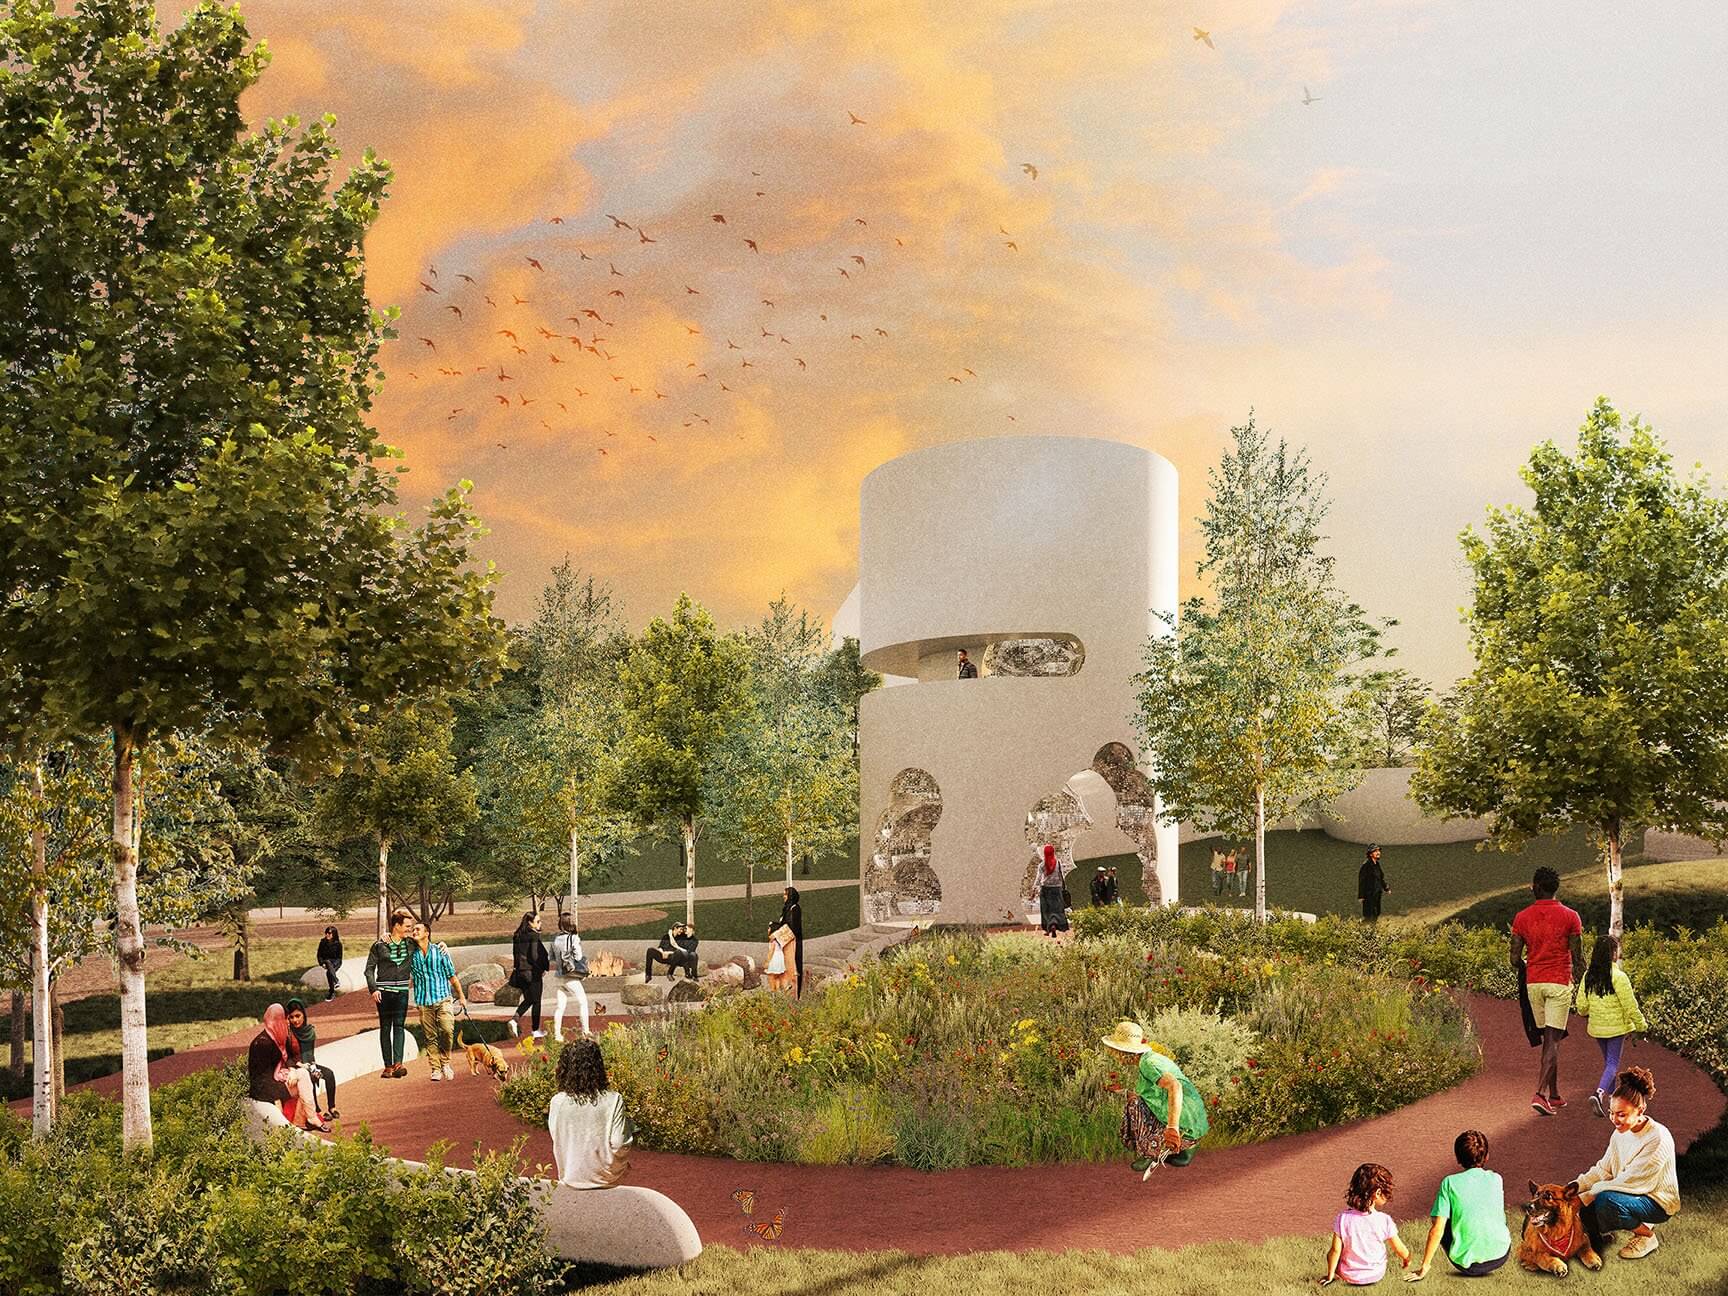 rendering of a large circular monument resembling a cloud 